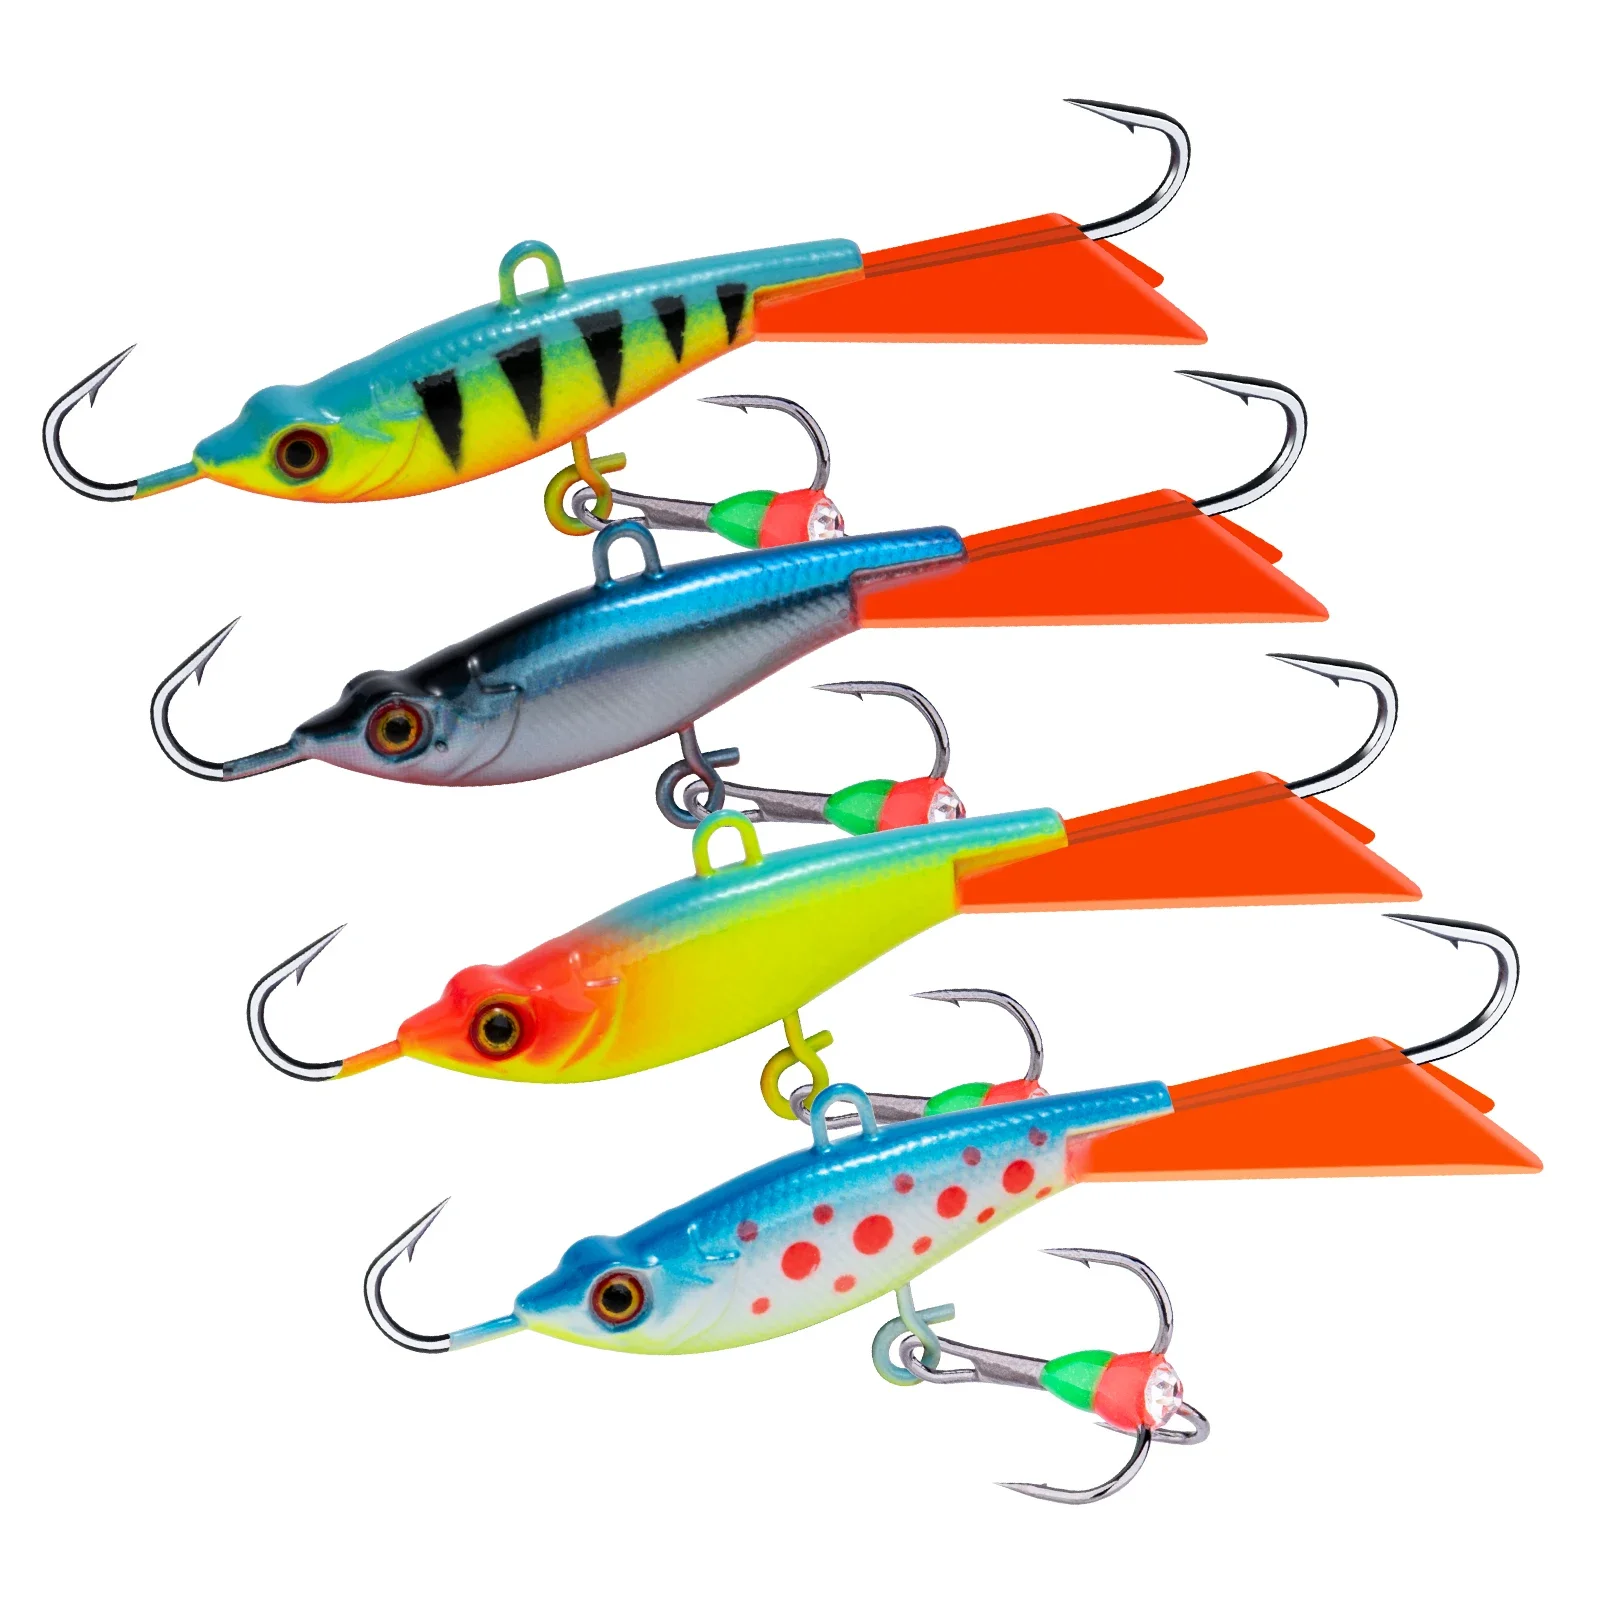 Goture 4/lot Balanced Jig Fishing Lure 10g 15g 4-7cm Winter Ice Fishing  Jigging Bait Tackle For Crappie, Walleye, Pike, Trout